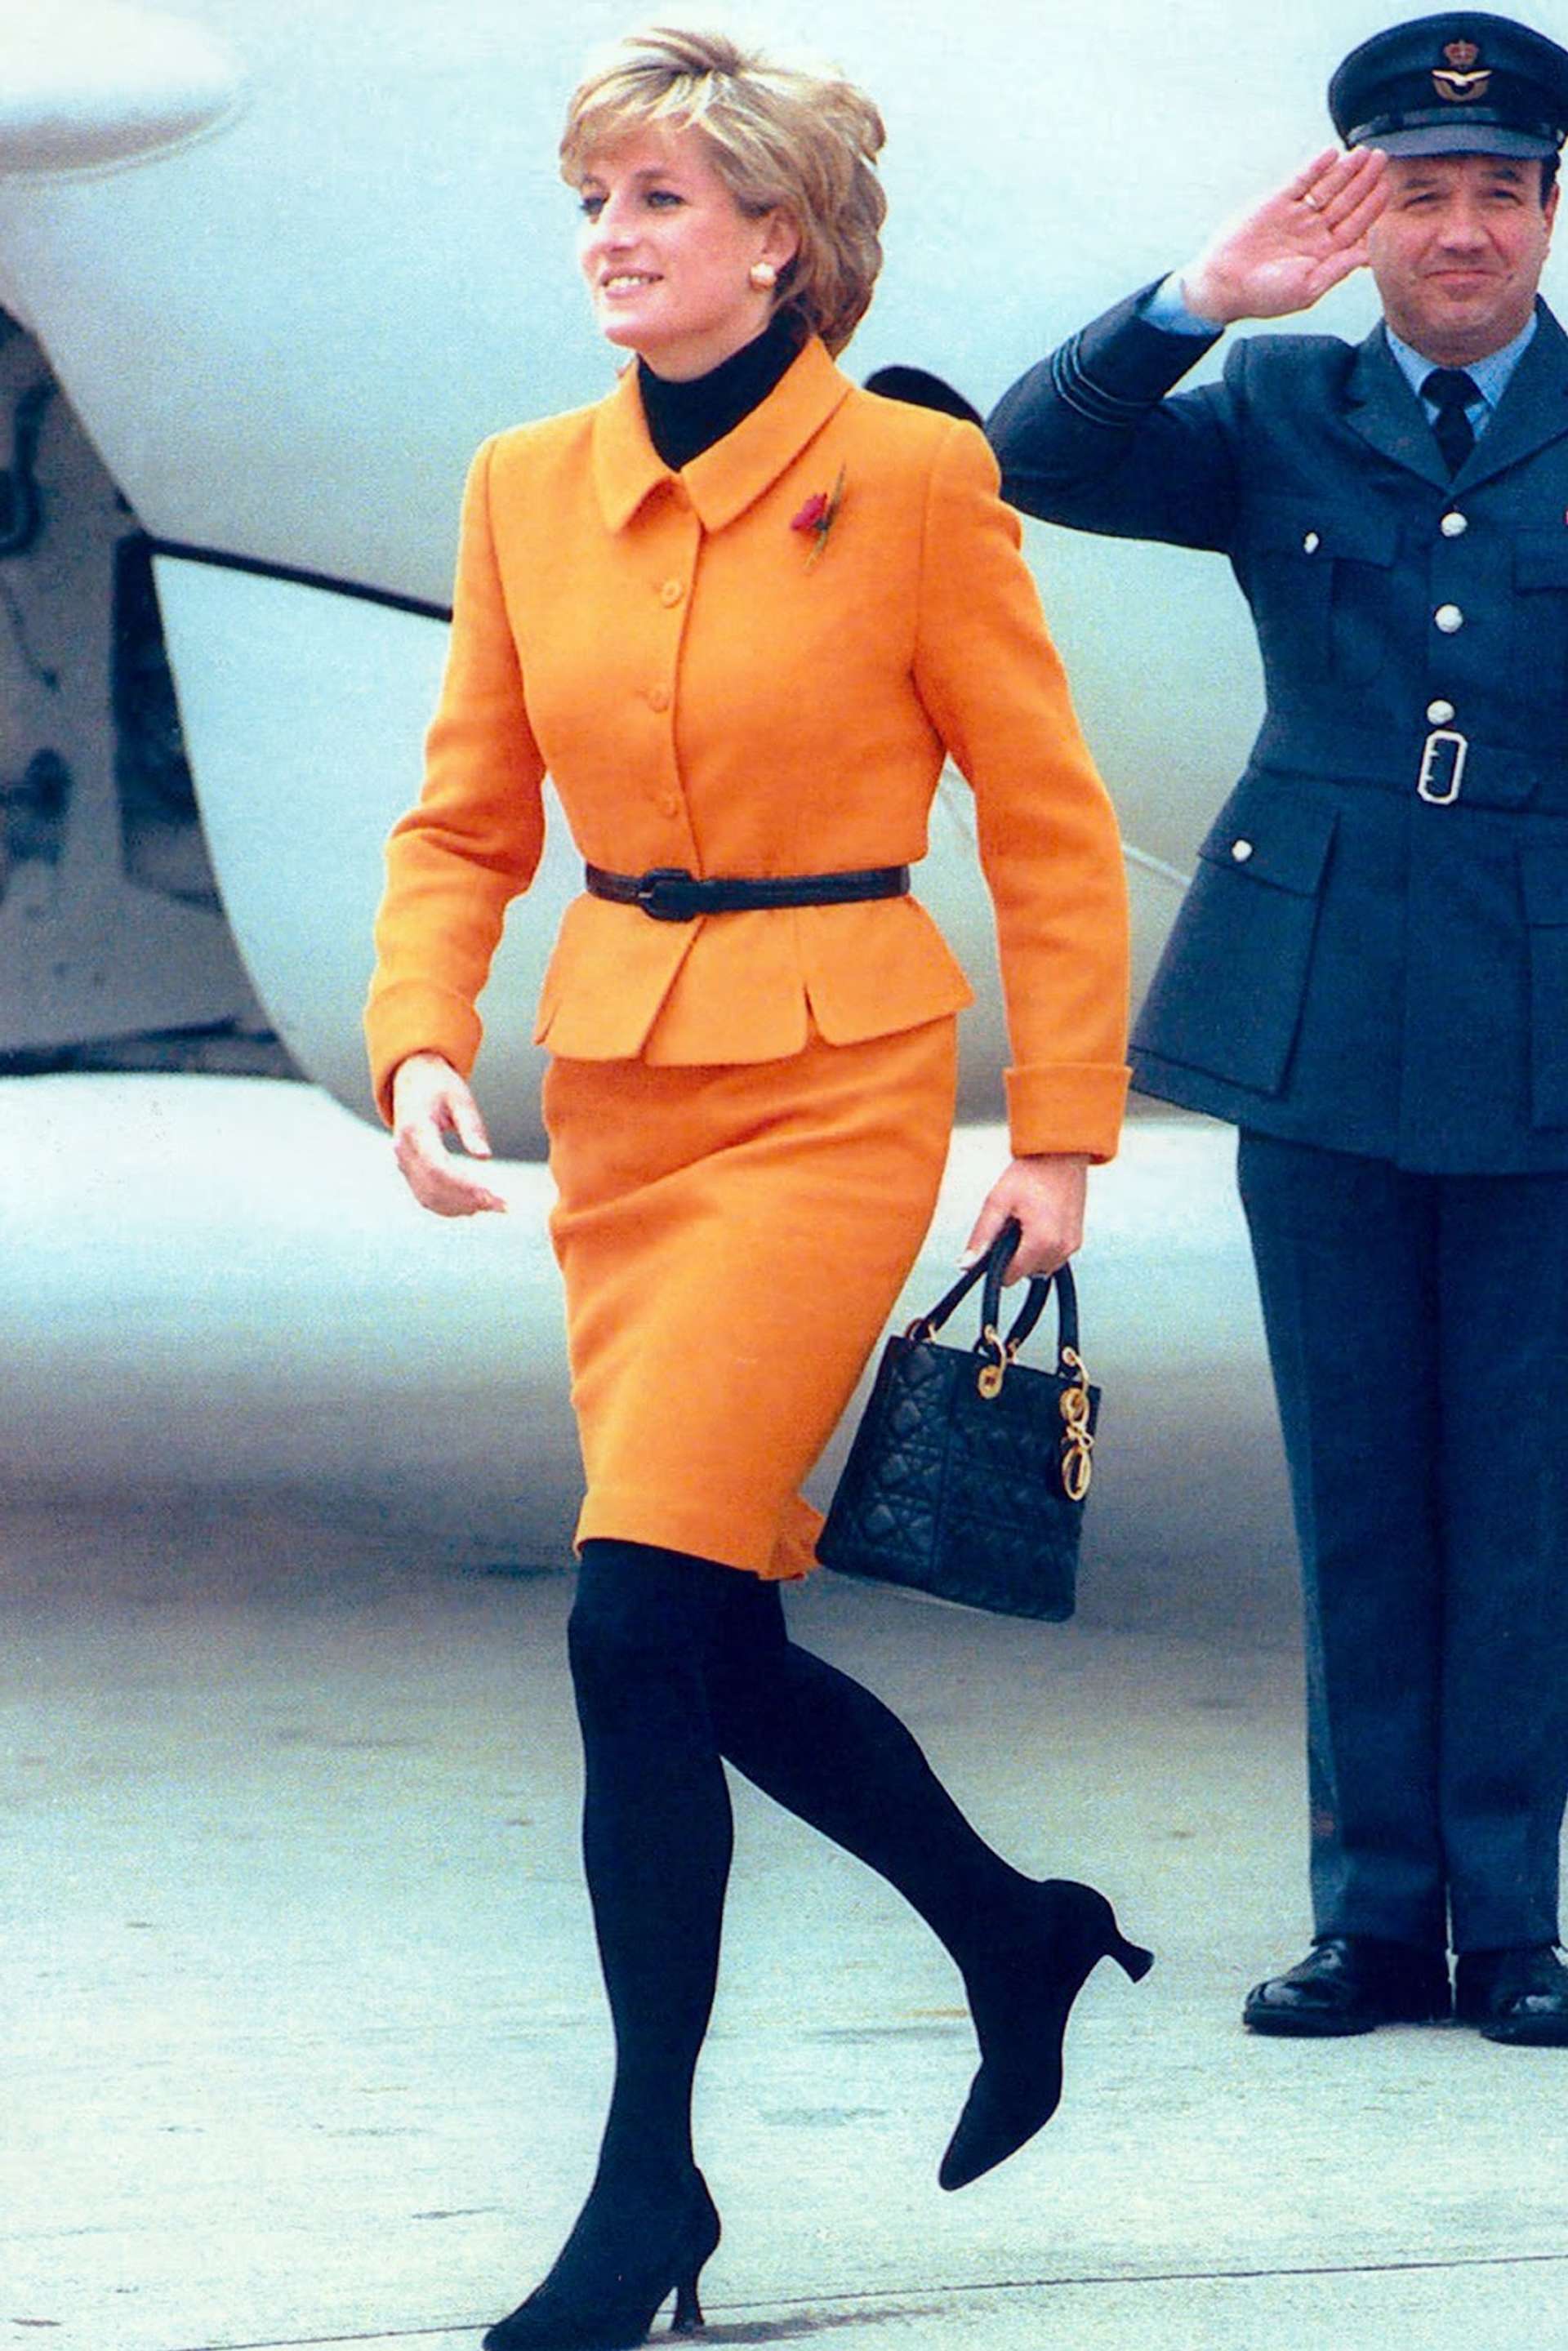 An image of Diana, Princess of Wales, dressed in orange, carrying her black Lady Dior handbag in 1996.